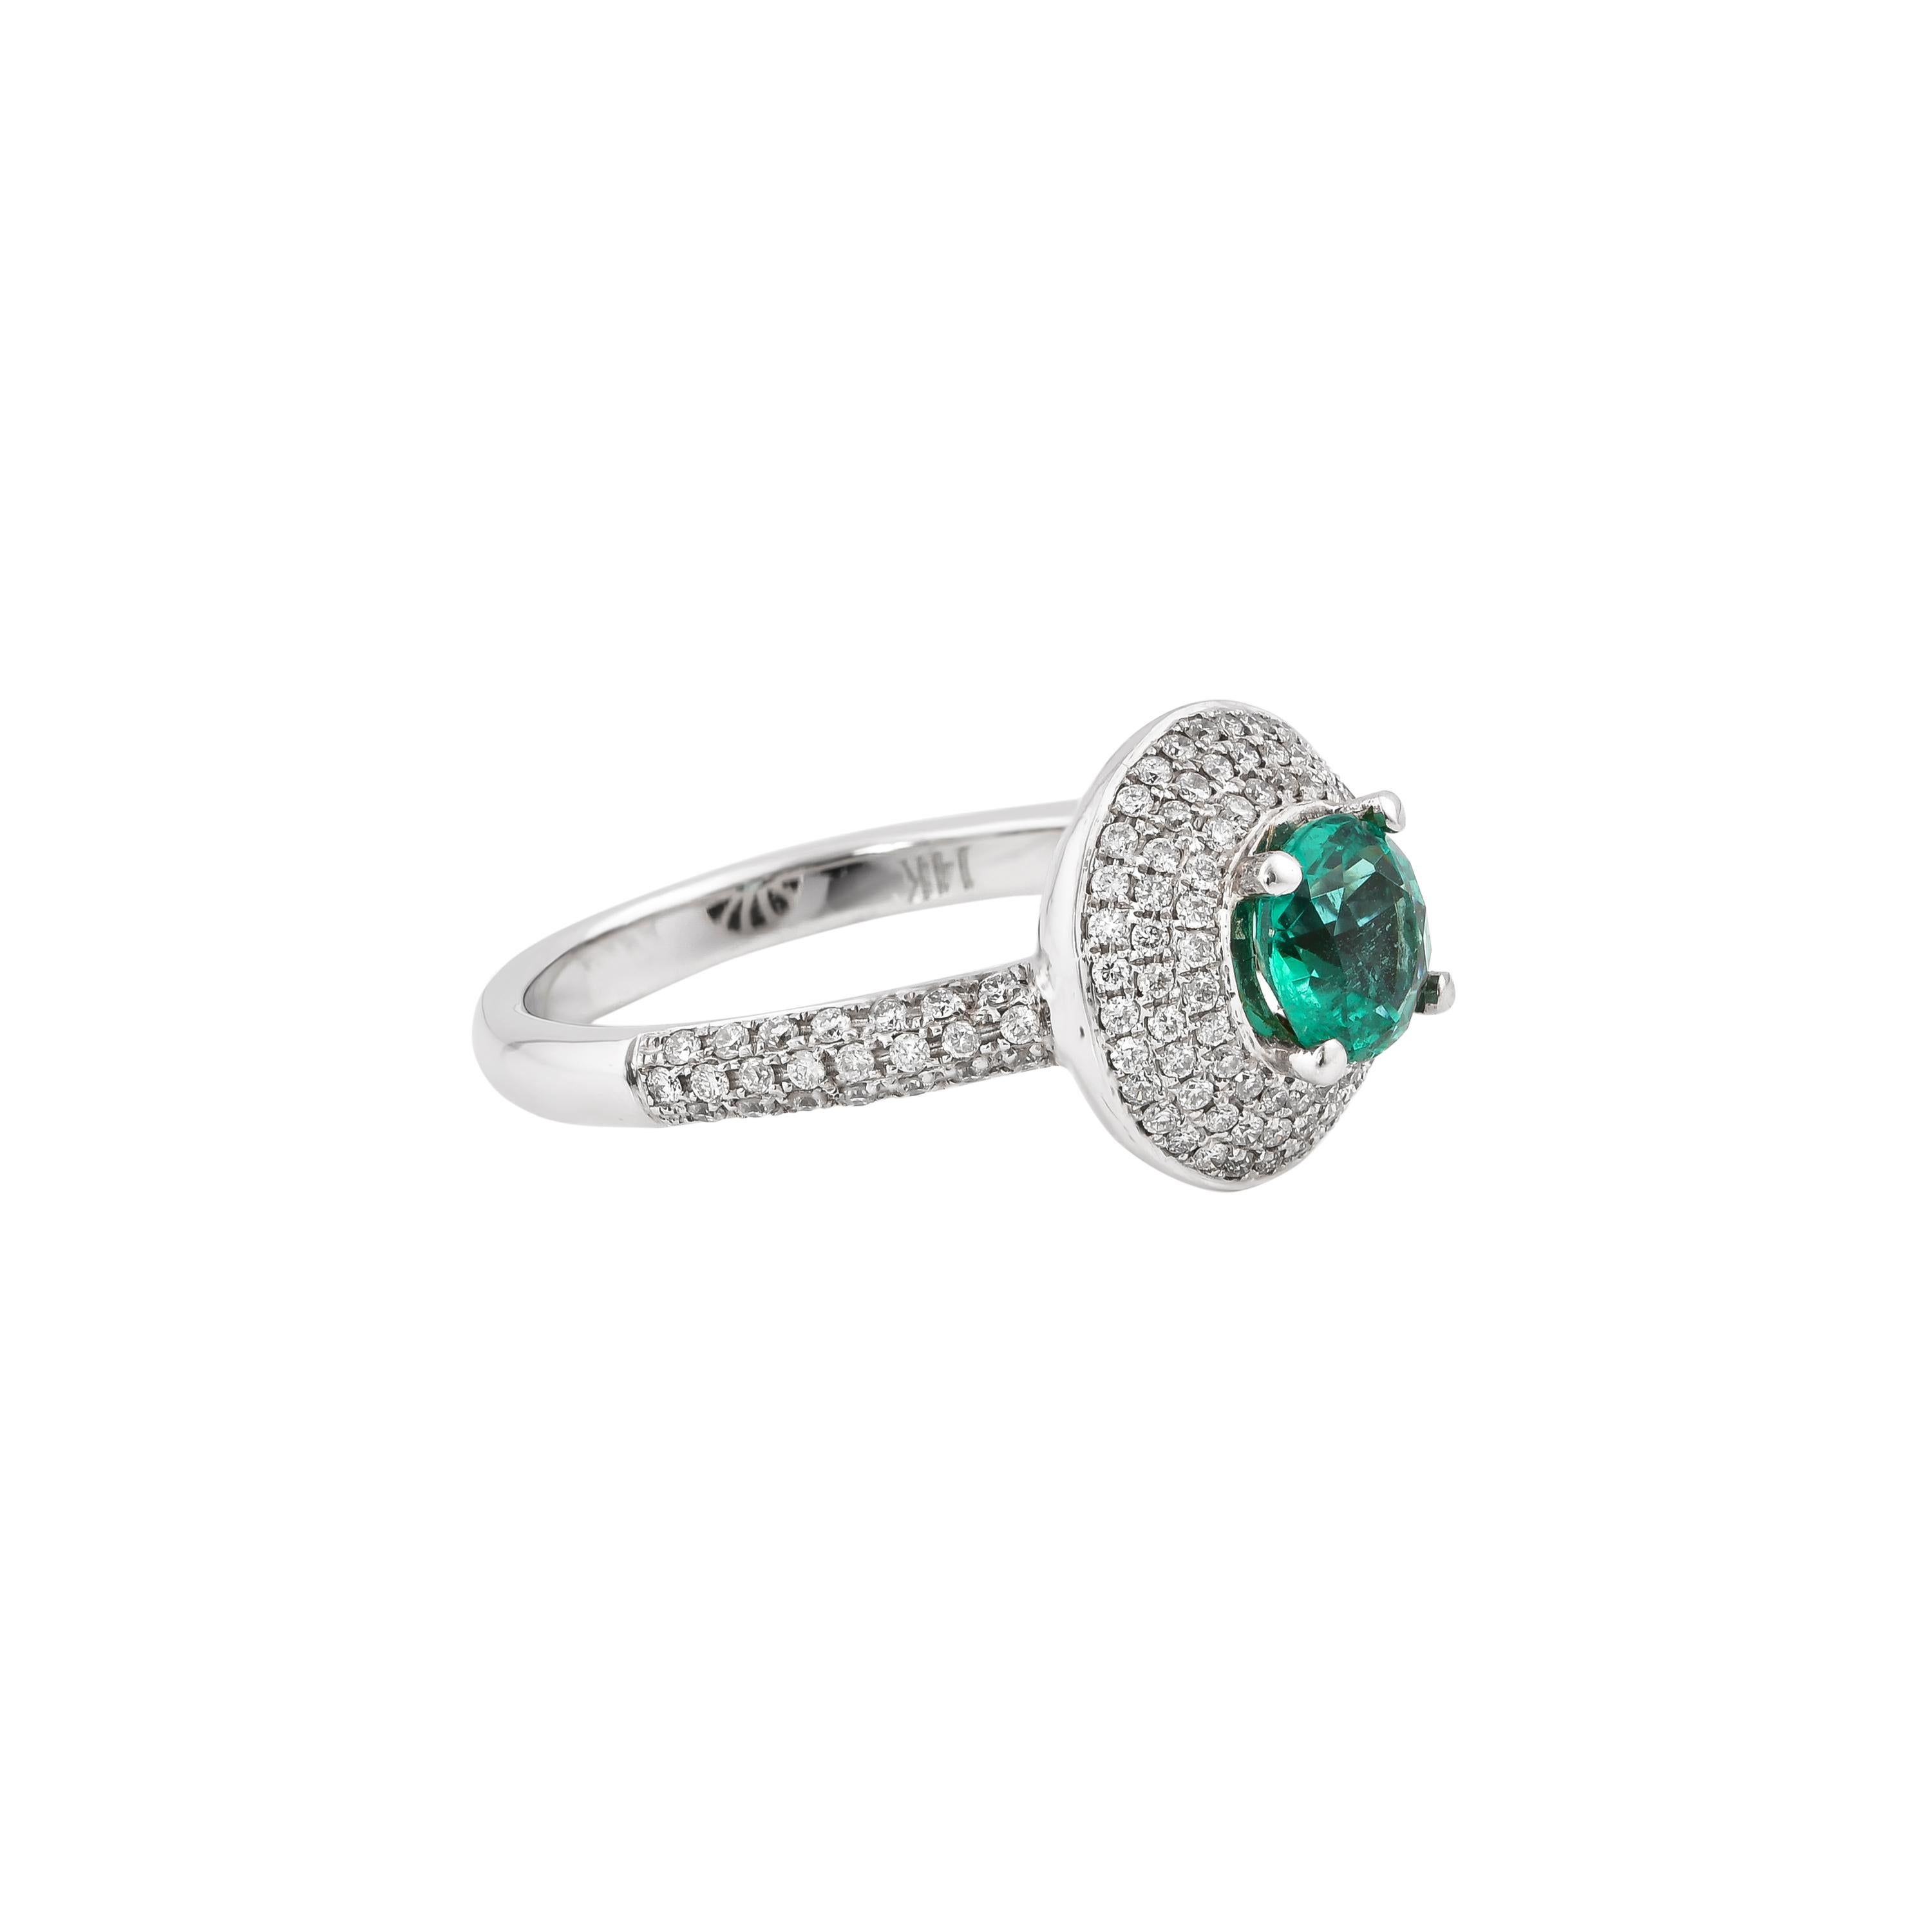 Classic rings with precious gemstones. We present a collection of everyday rings with either blue sapphire, emerald, or ruby that are accented with diamonds. These are gorgeous bridal and engagement rings to give to your loved one. 

Classic emerald